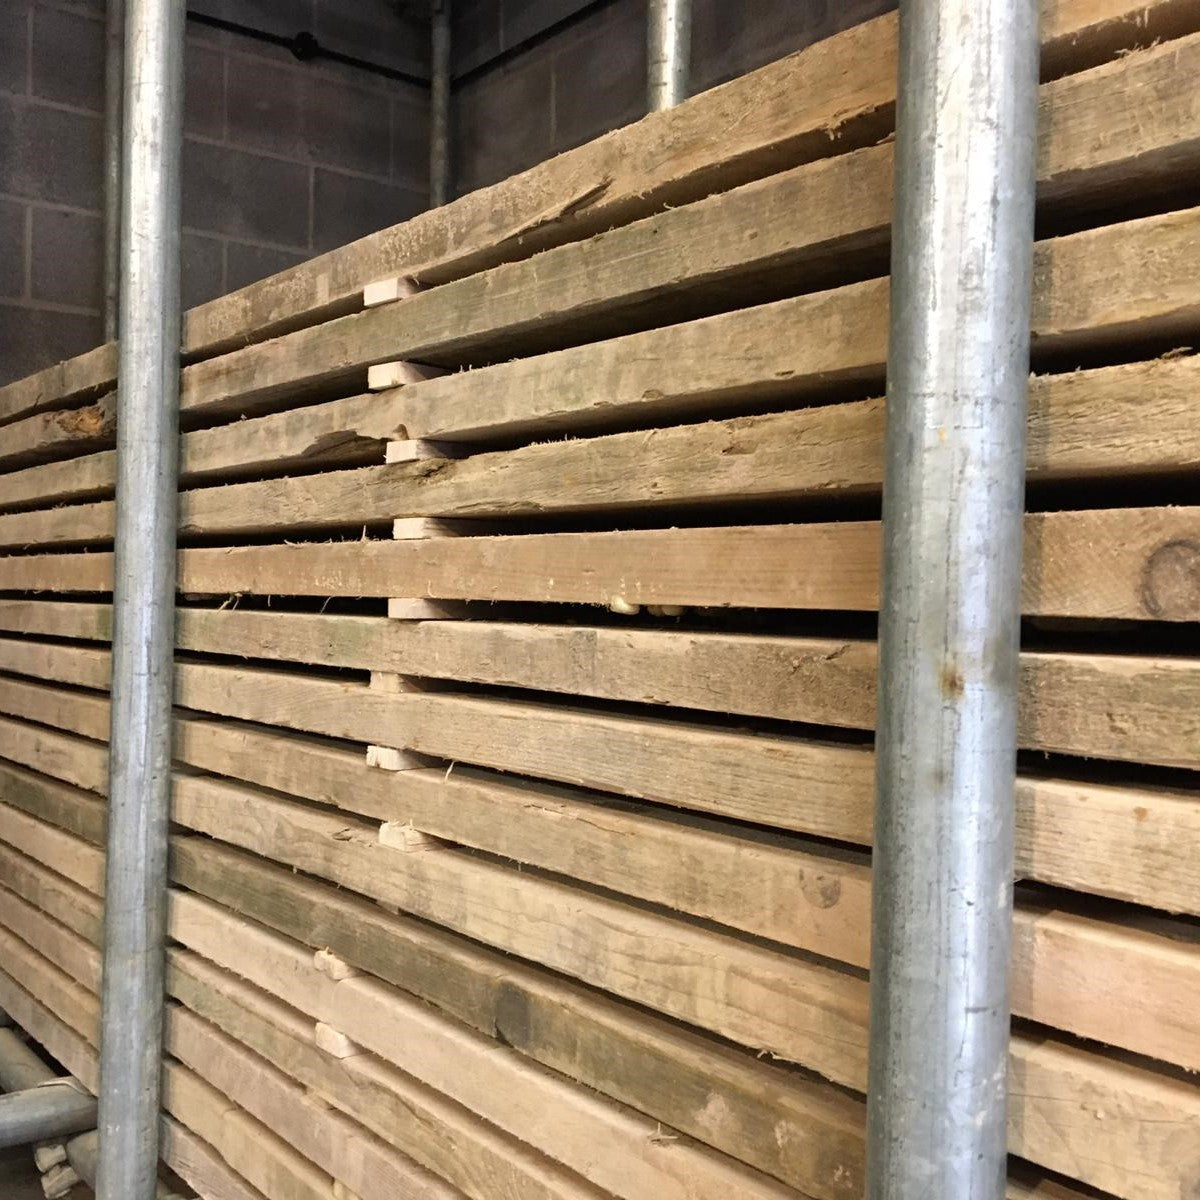 Why Use Reclaimed Scaffold Boards?